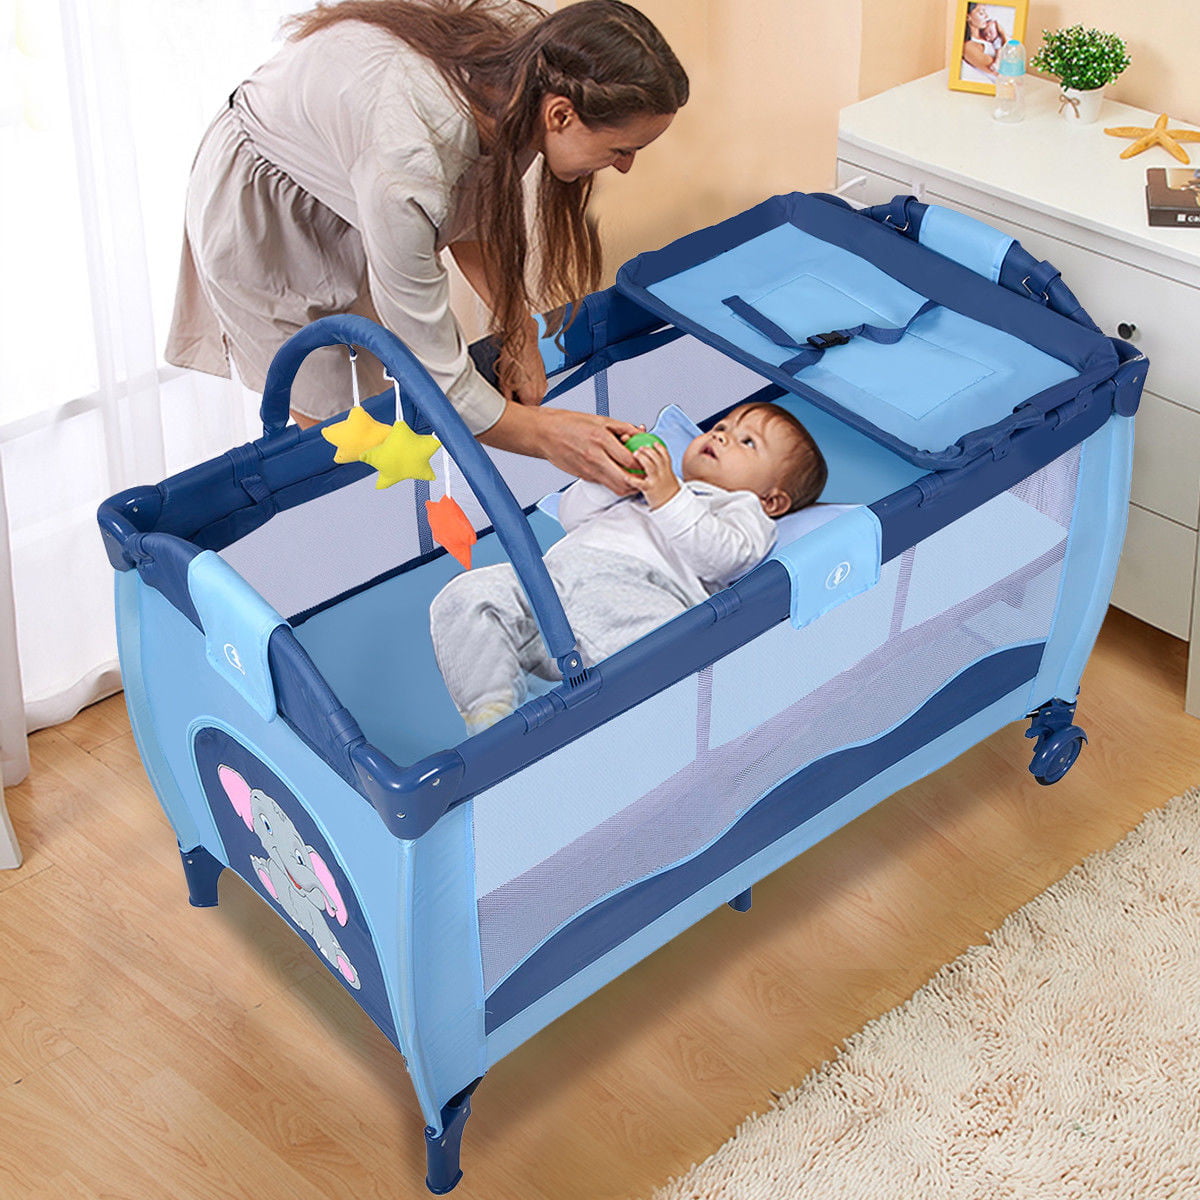 Bed Play Pen Child Bassinet Playpen Entryway Blue with Mat 2 in 1 COSTWAY Portable Infant Baby Travel Cot